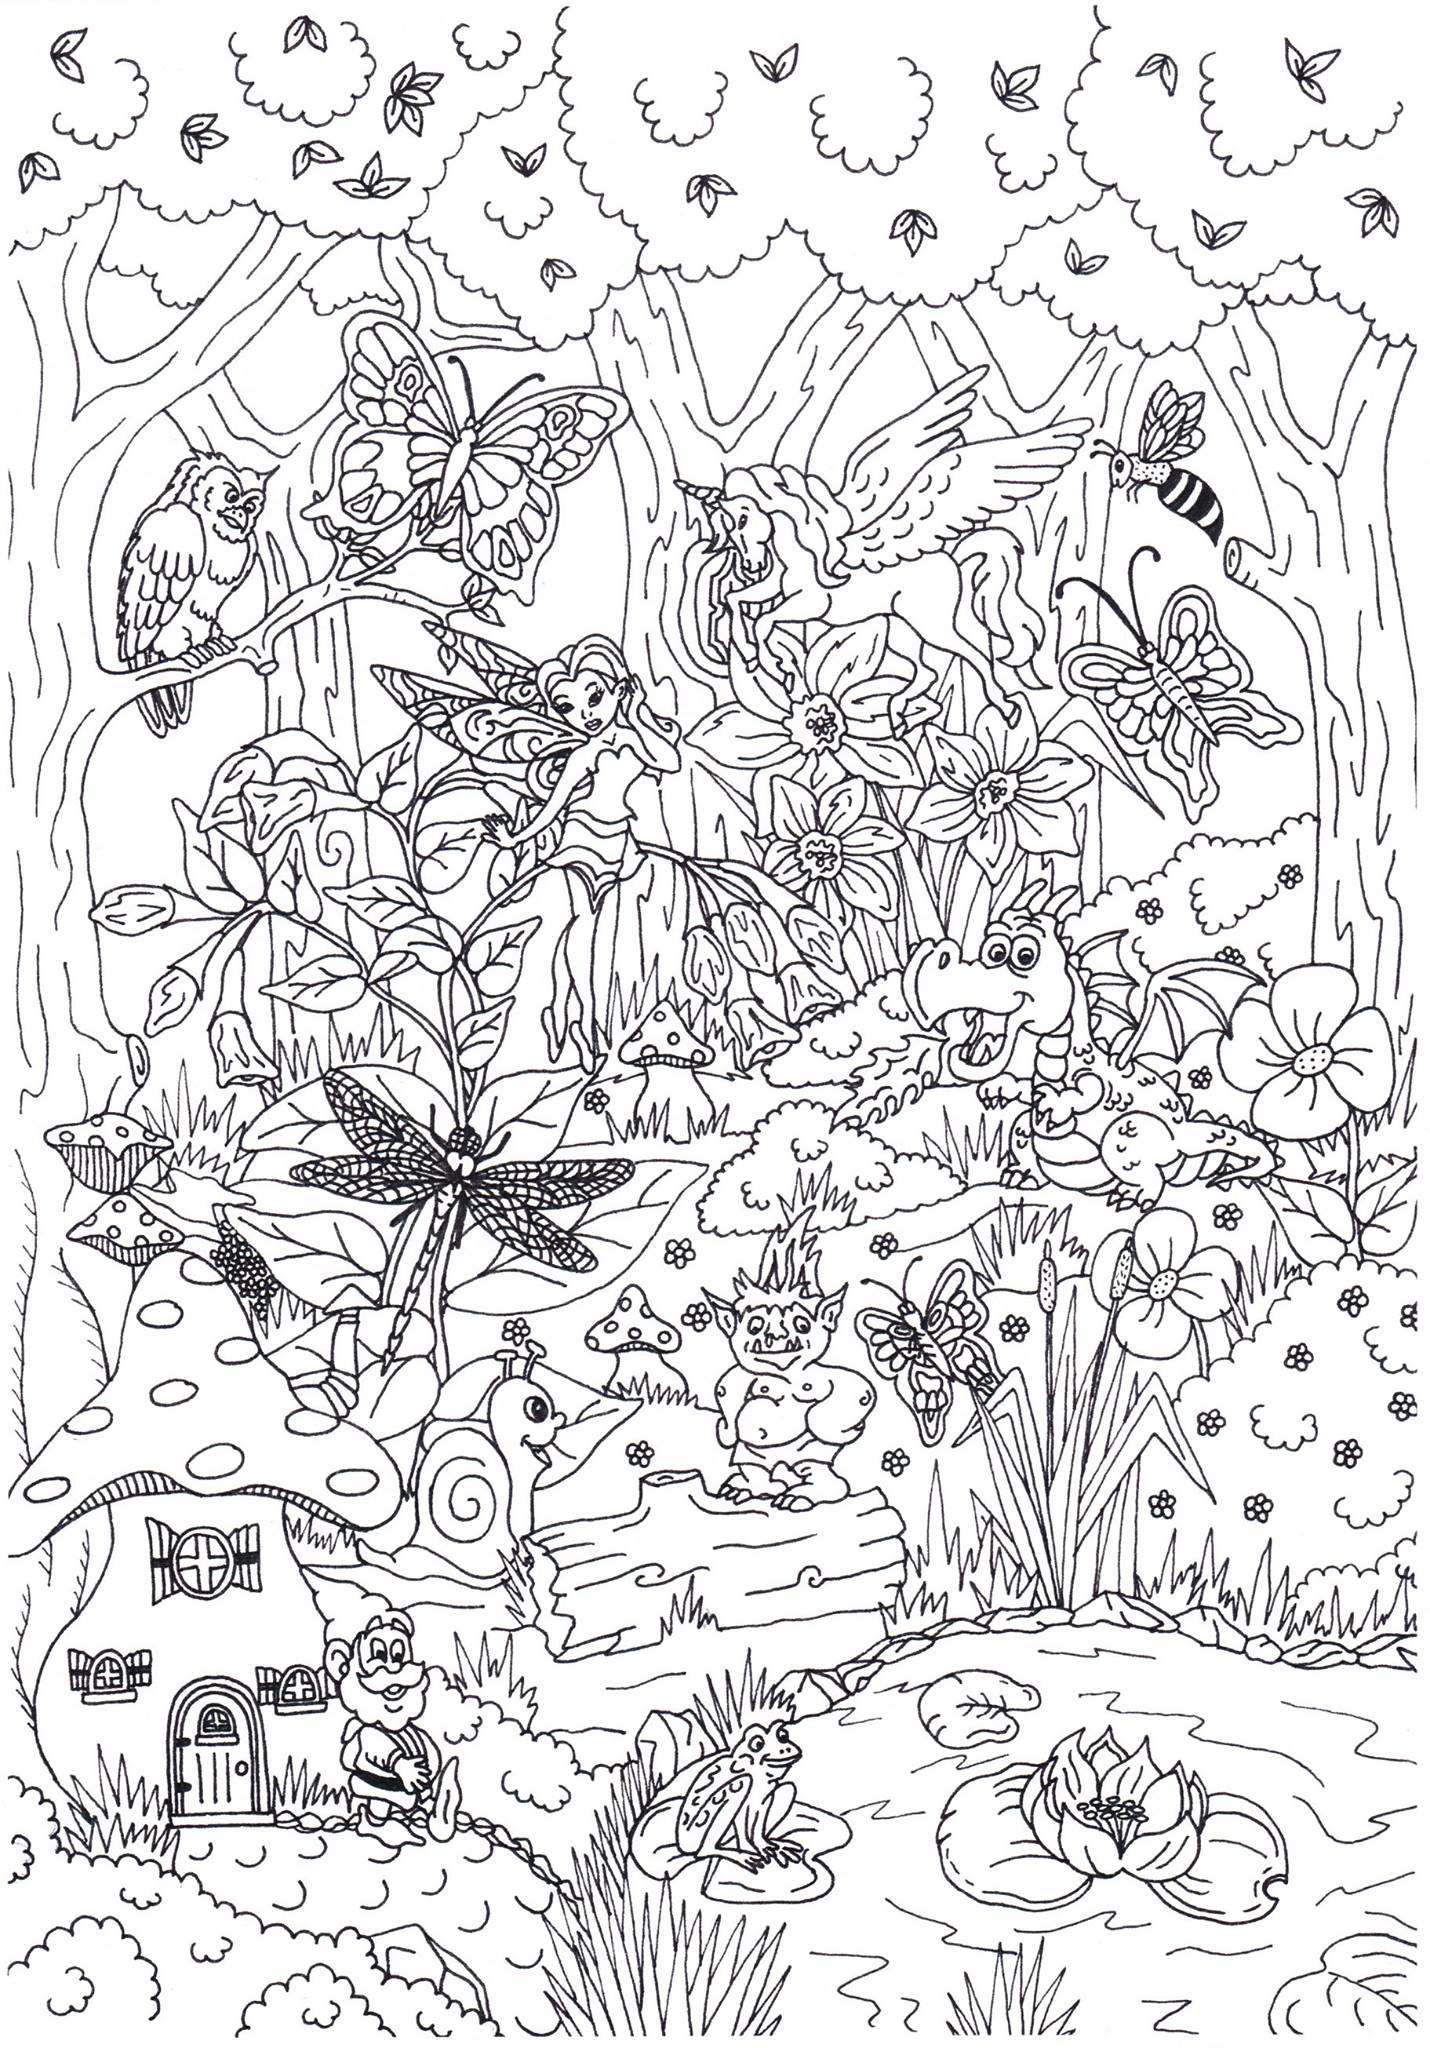 Coloring page fairytale forest